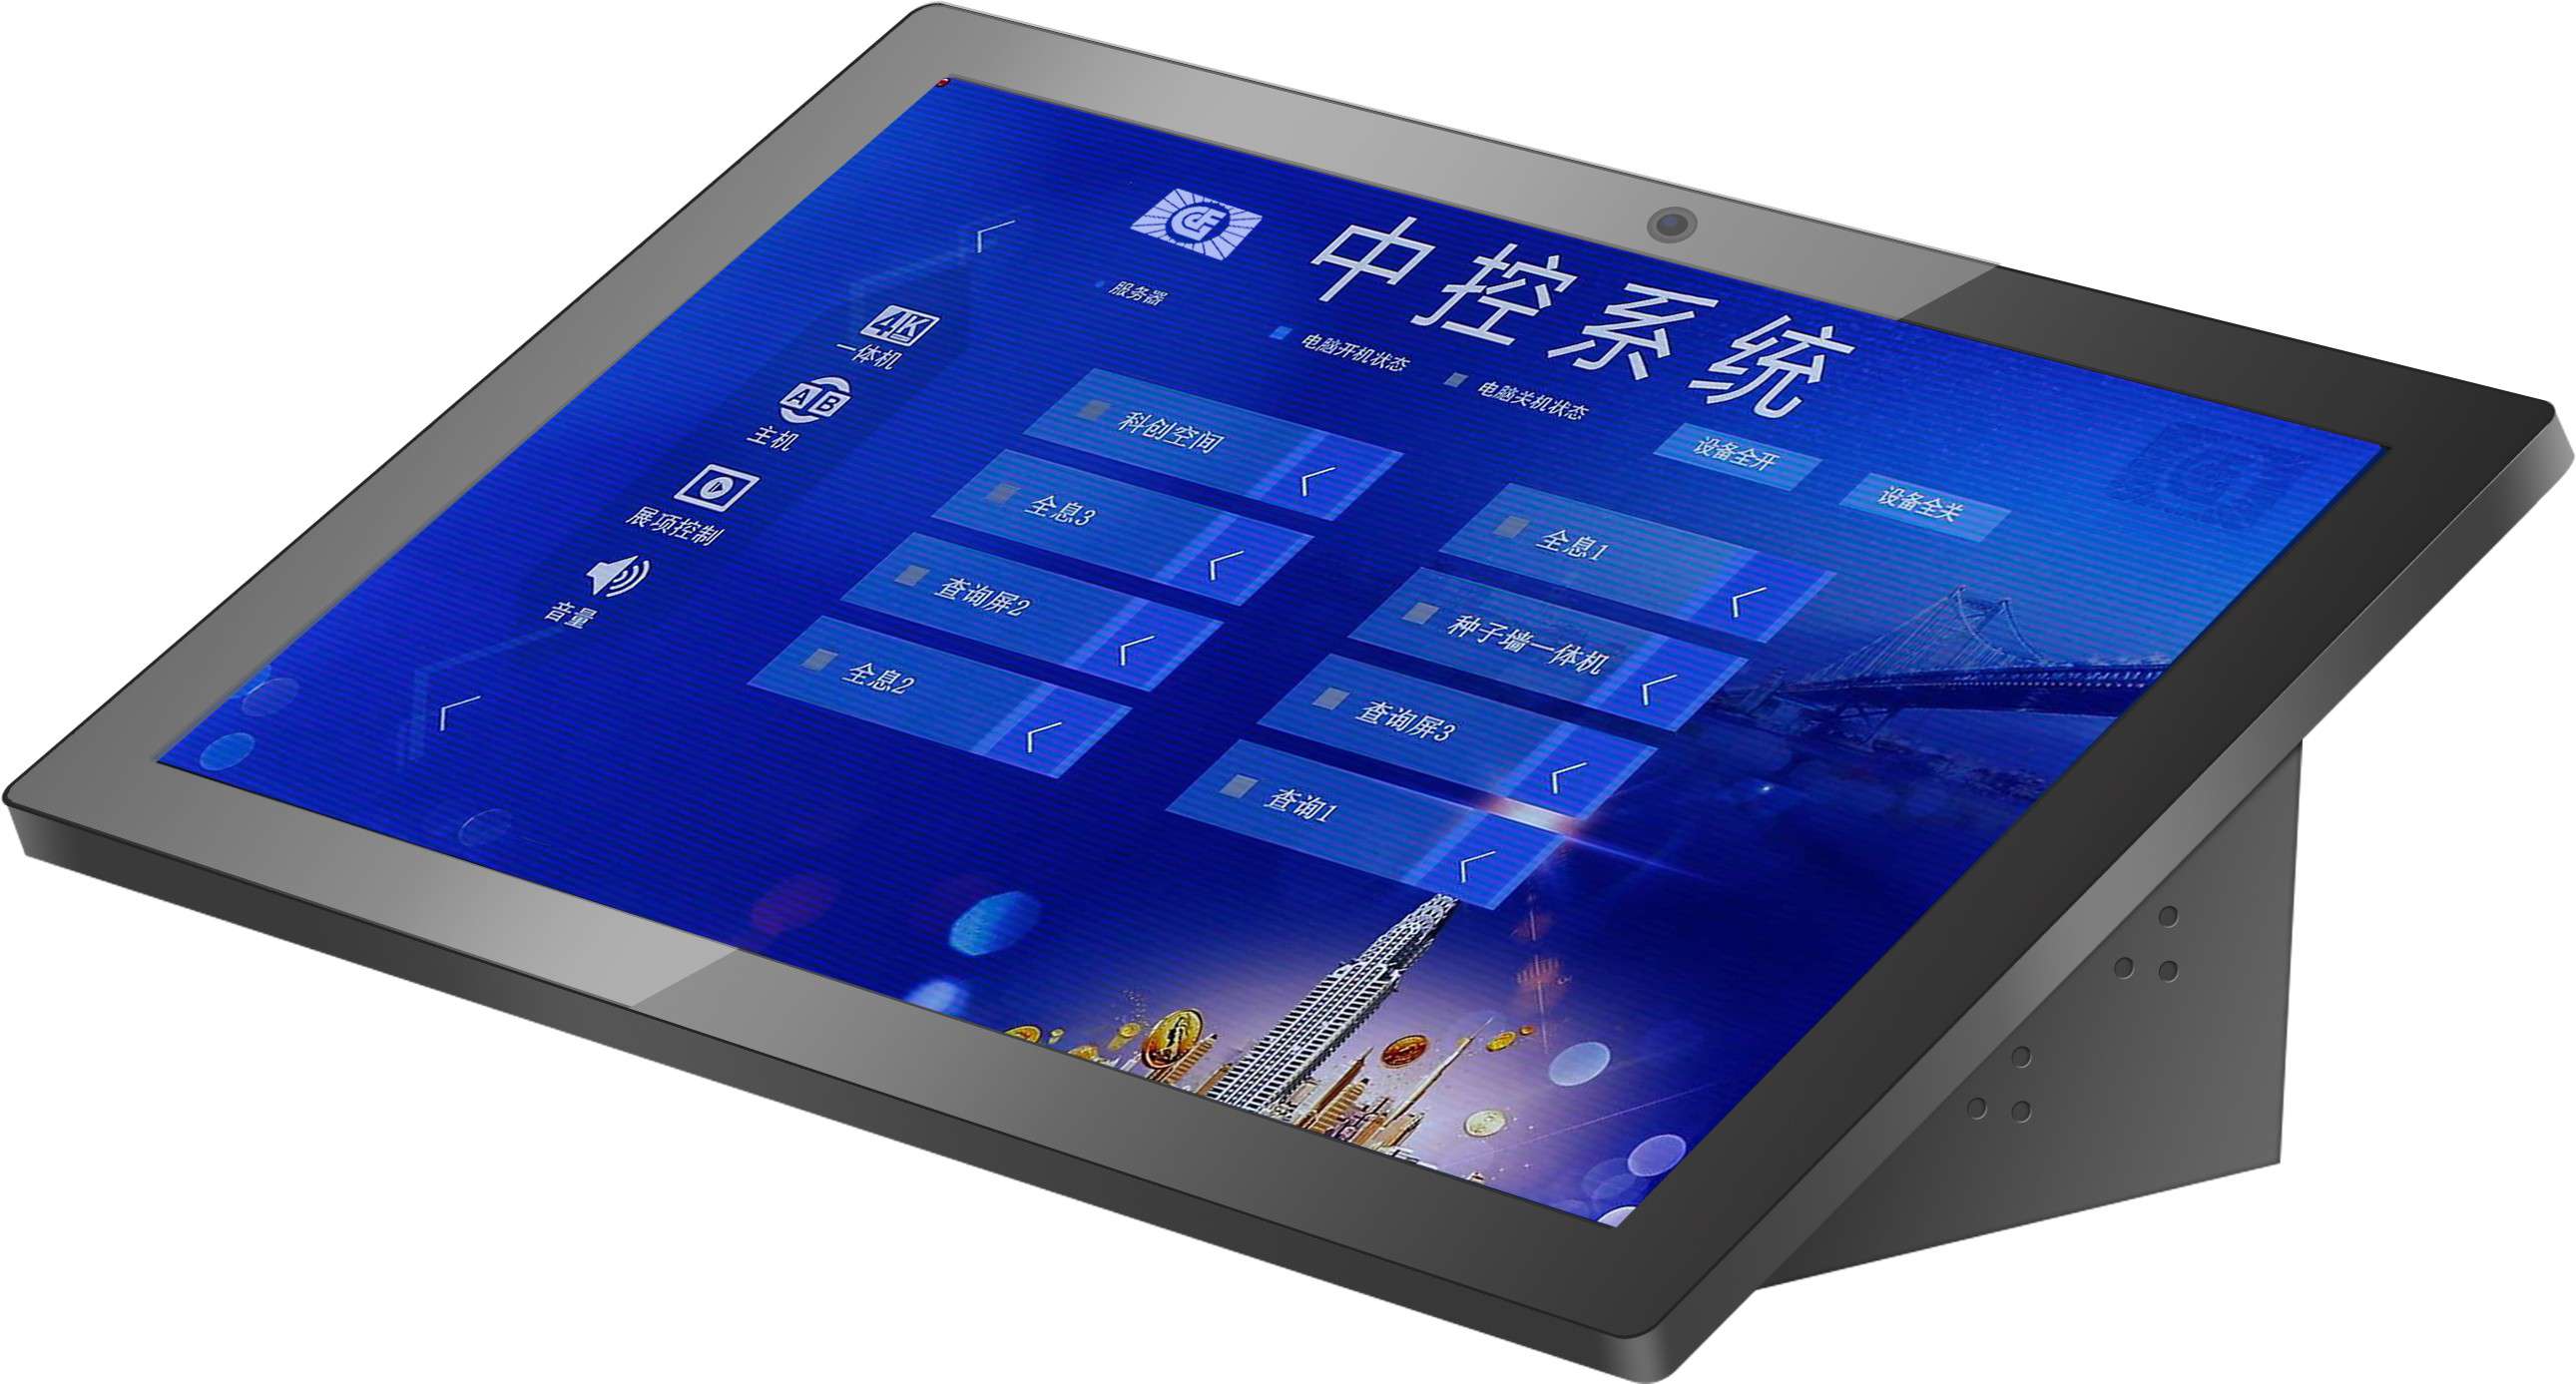 11.6-inch LCD programmable desktop touch central c